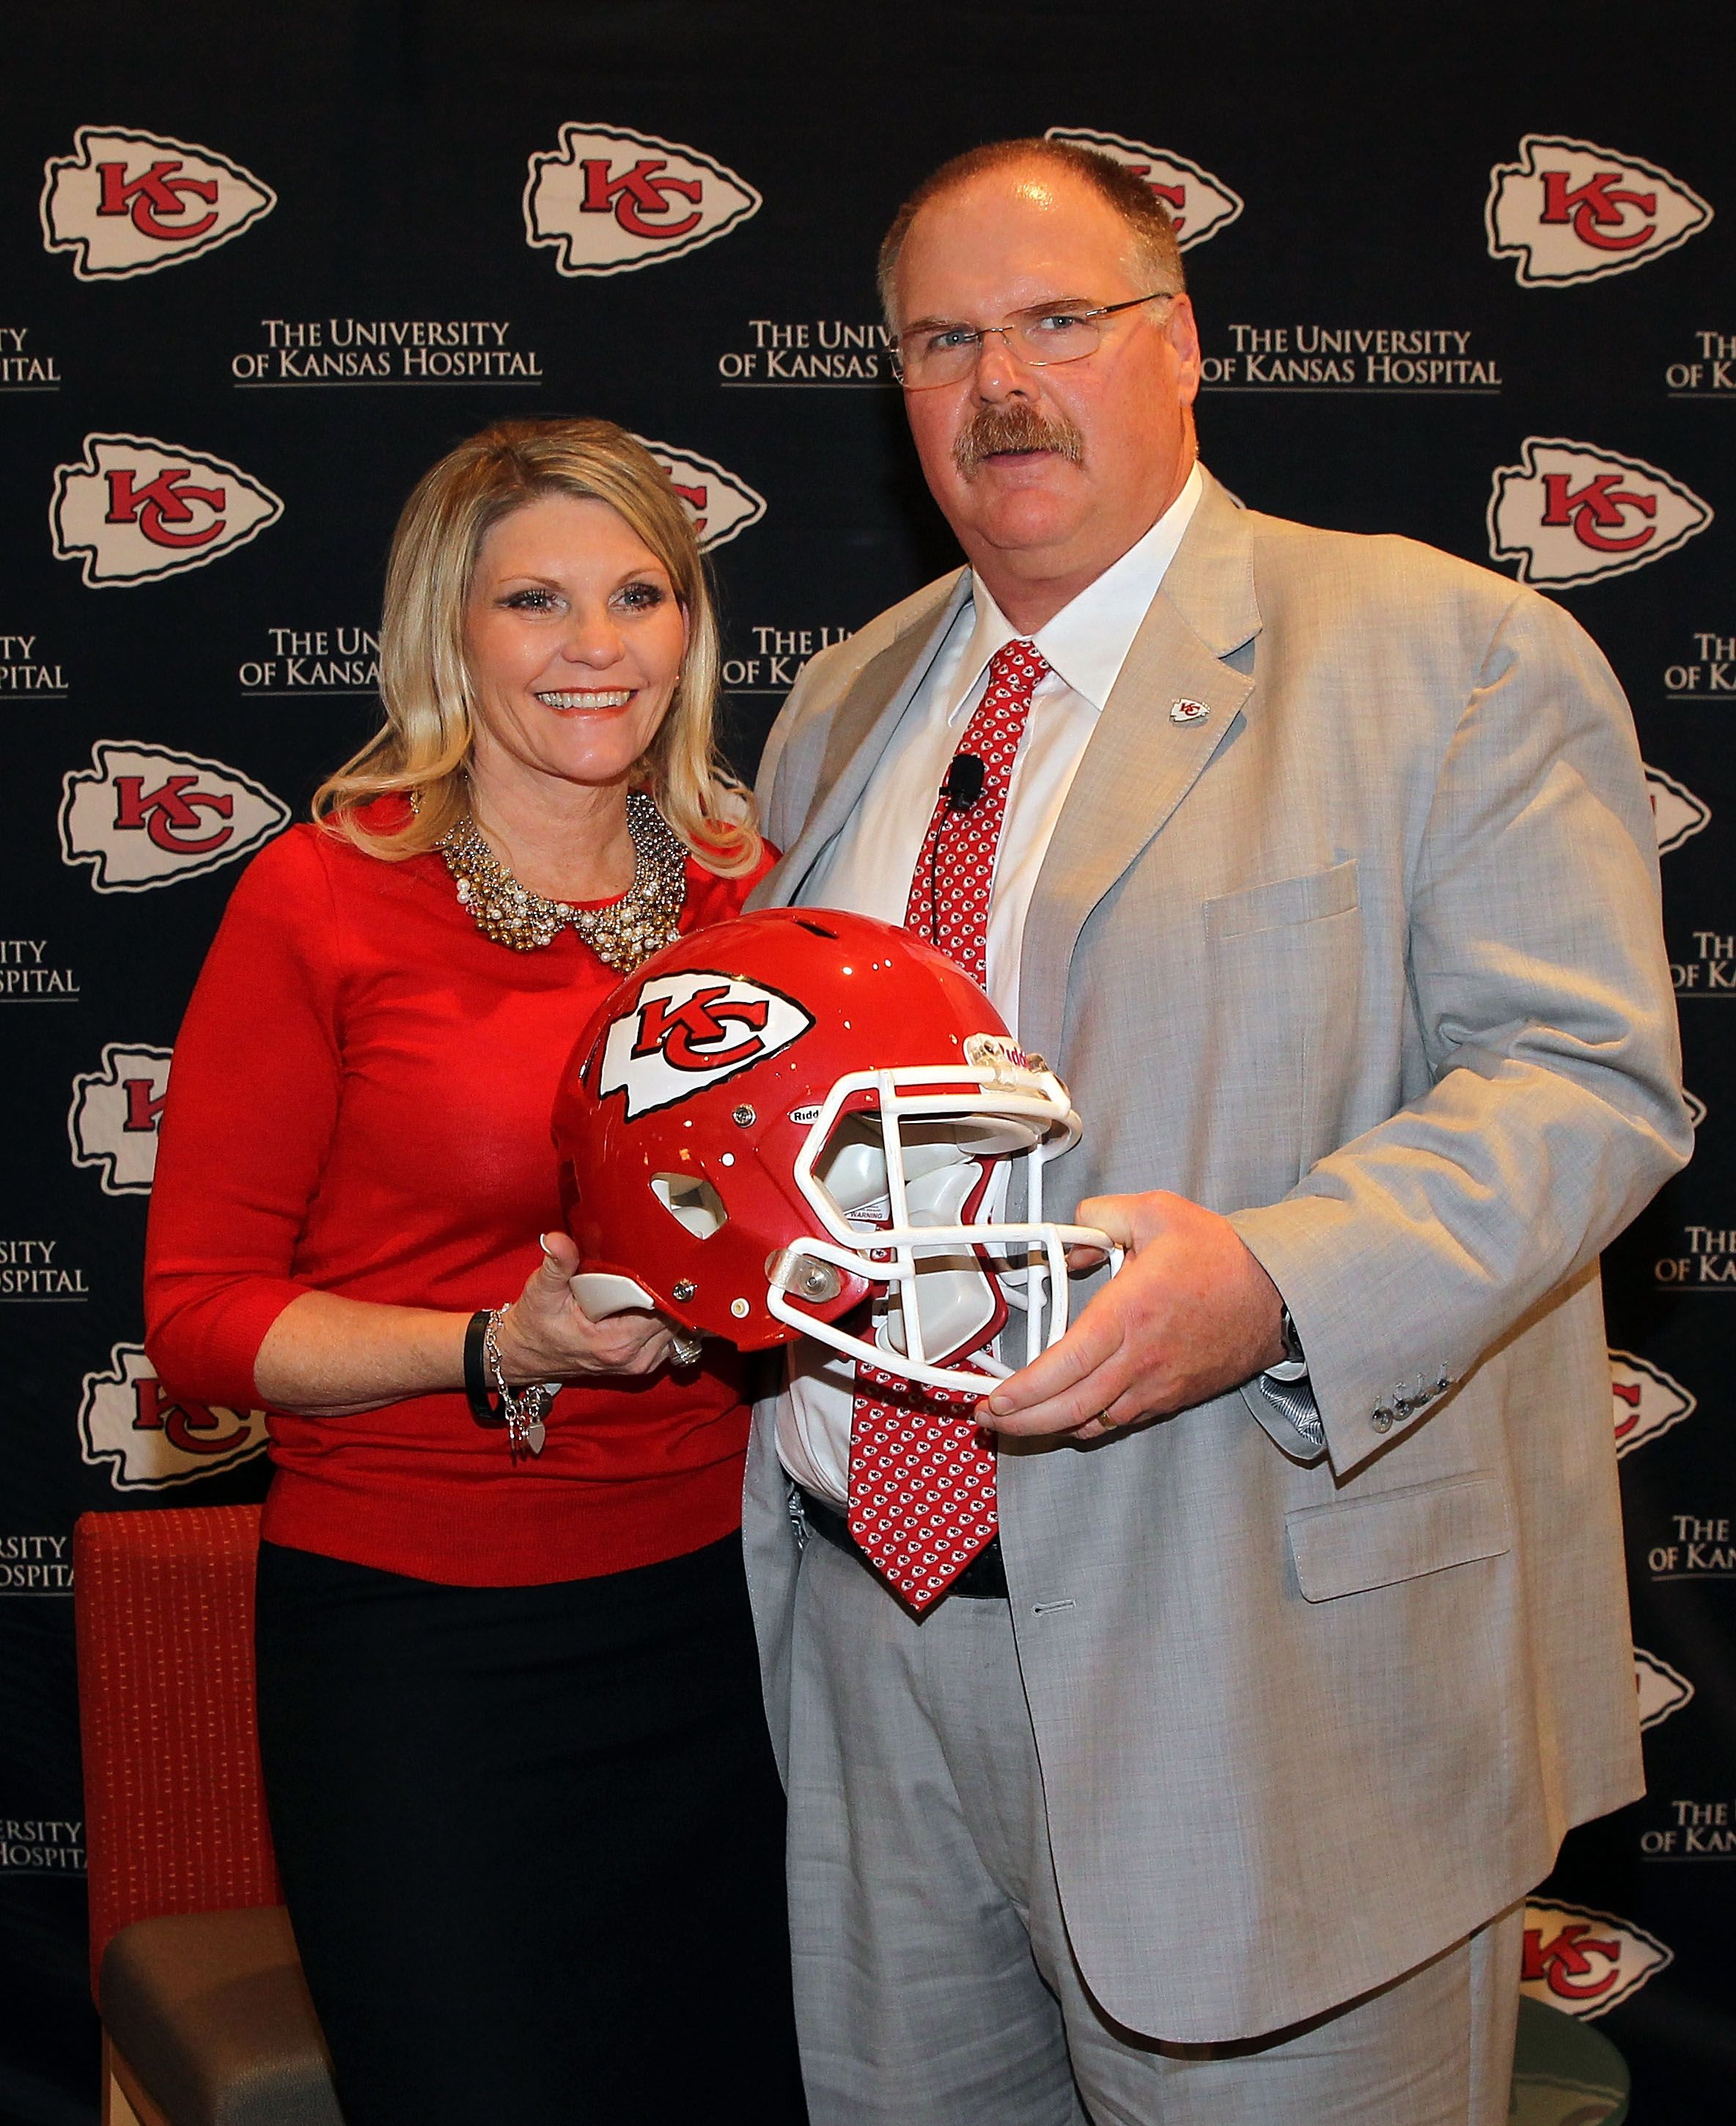 Andy Reid and Tammy Reid during a press conference on January 7, 2013, in Kansas City, Missouri. | Source: Getty Images